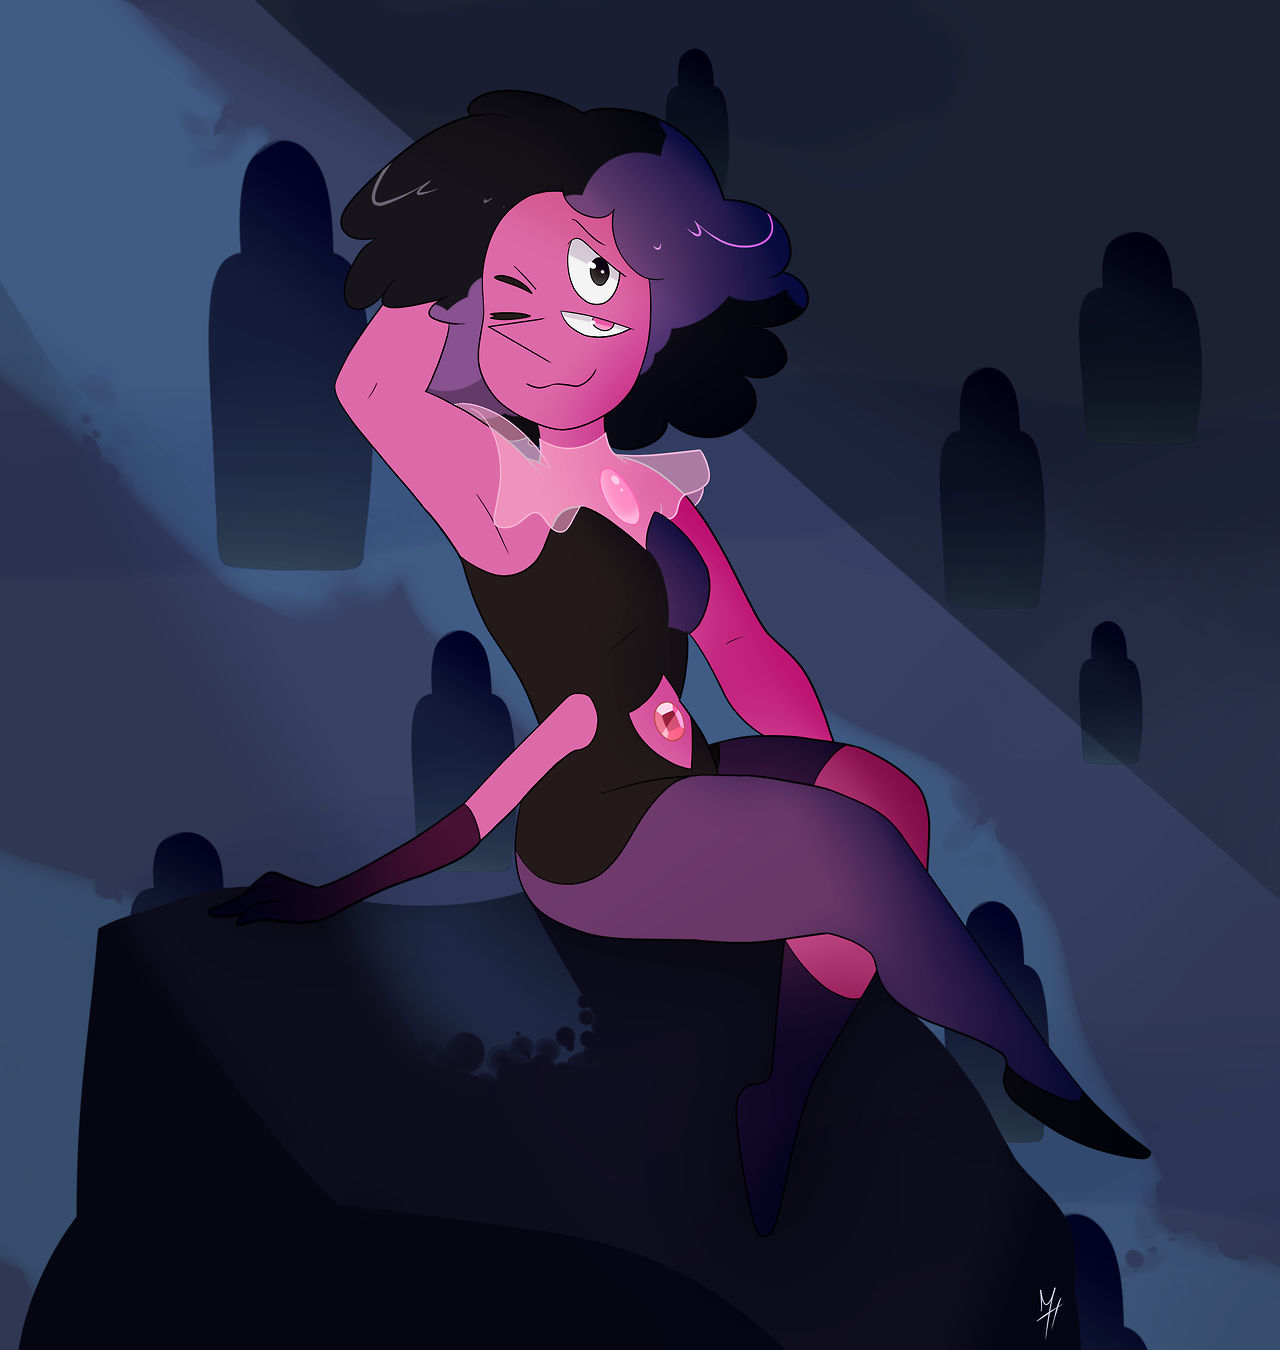 drawing has been a pain in my butt lately, but I still managed to cough something up somehow lmao (also rhodonite is very pretty and deserves love) feel free to do whatever with this picture, just...